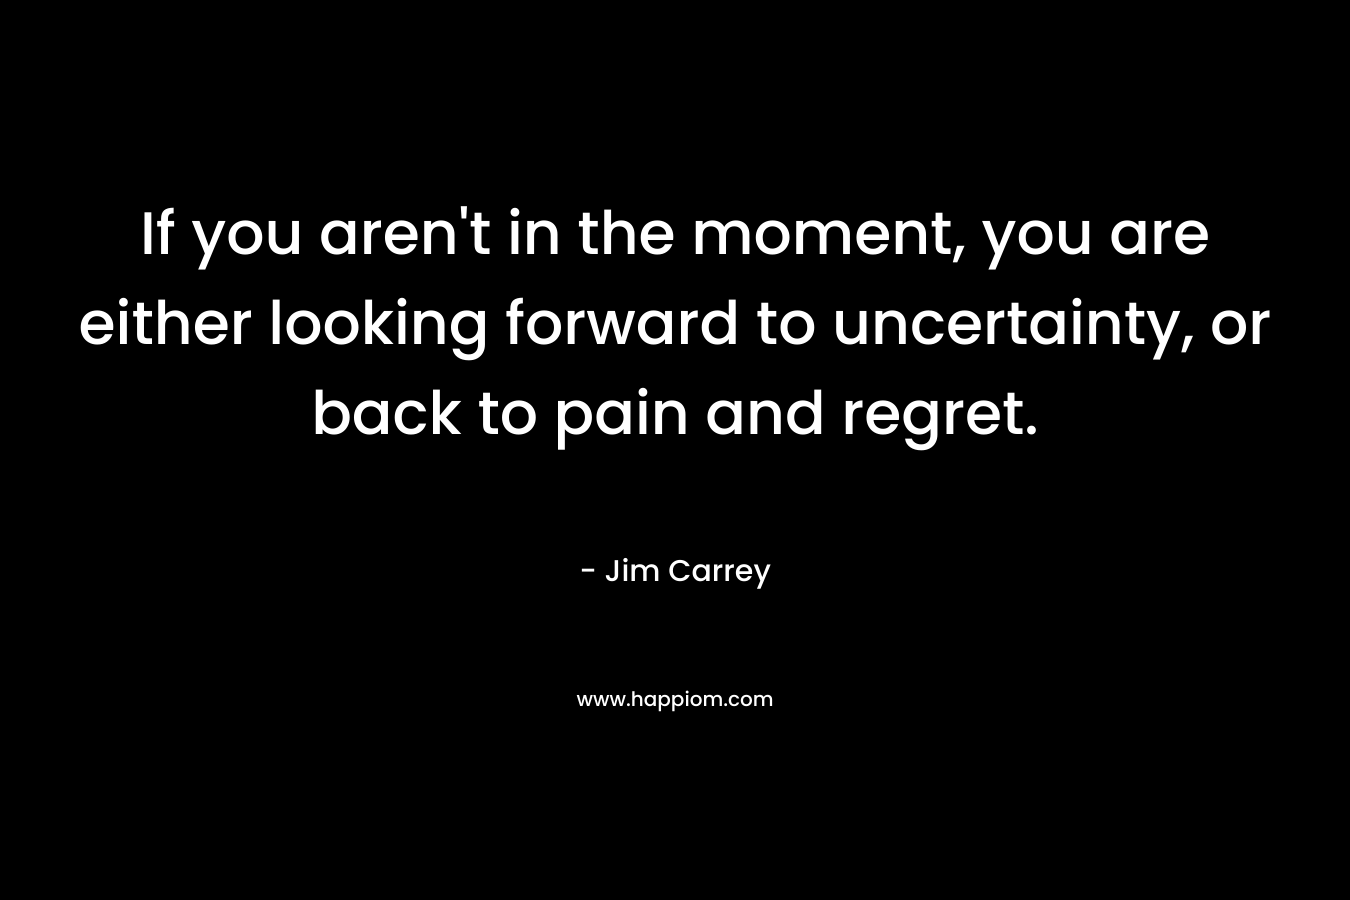 If you aren’t in the moment, you are either looking forward to uncertainty, or back to pain and regret. – Jim Carrey